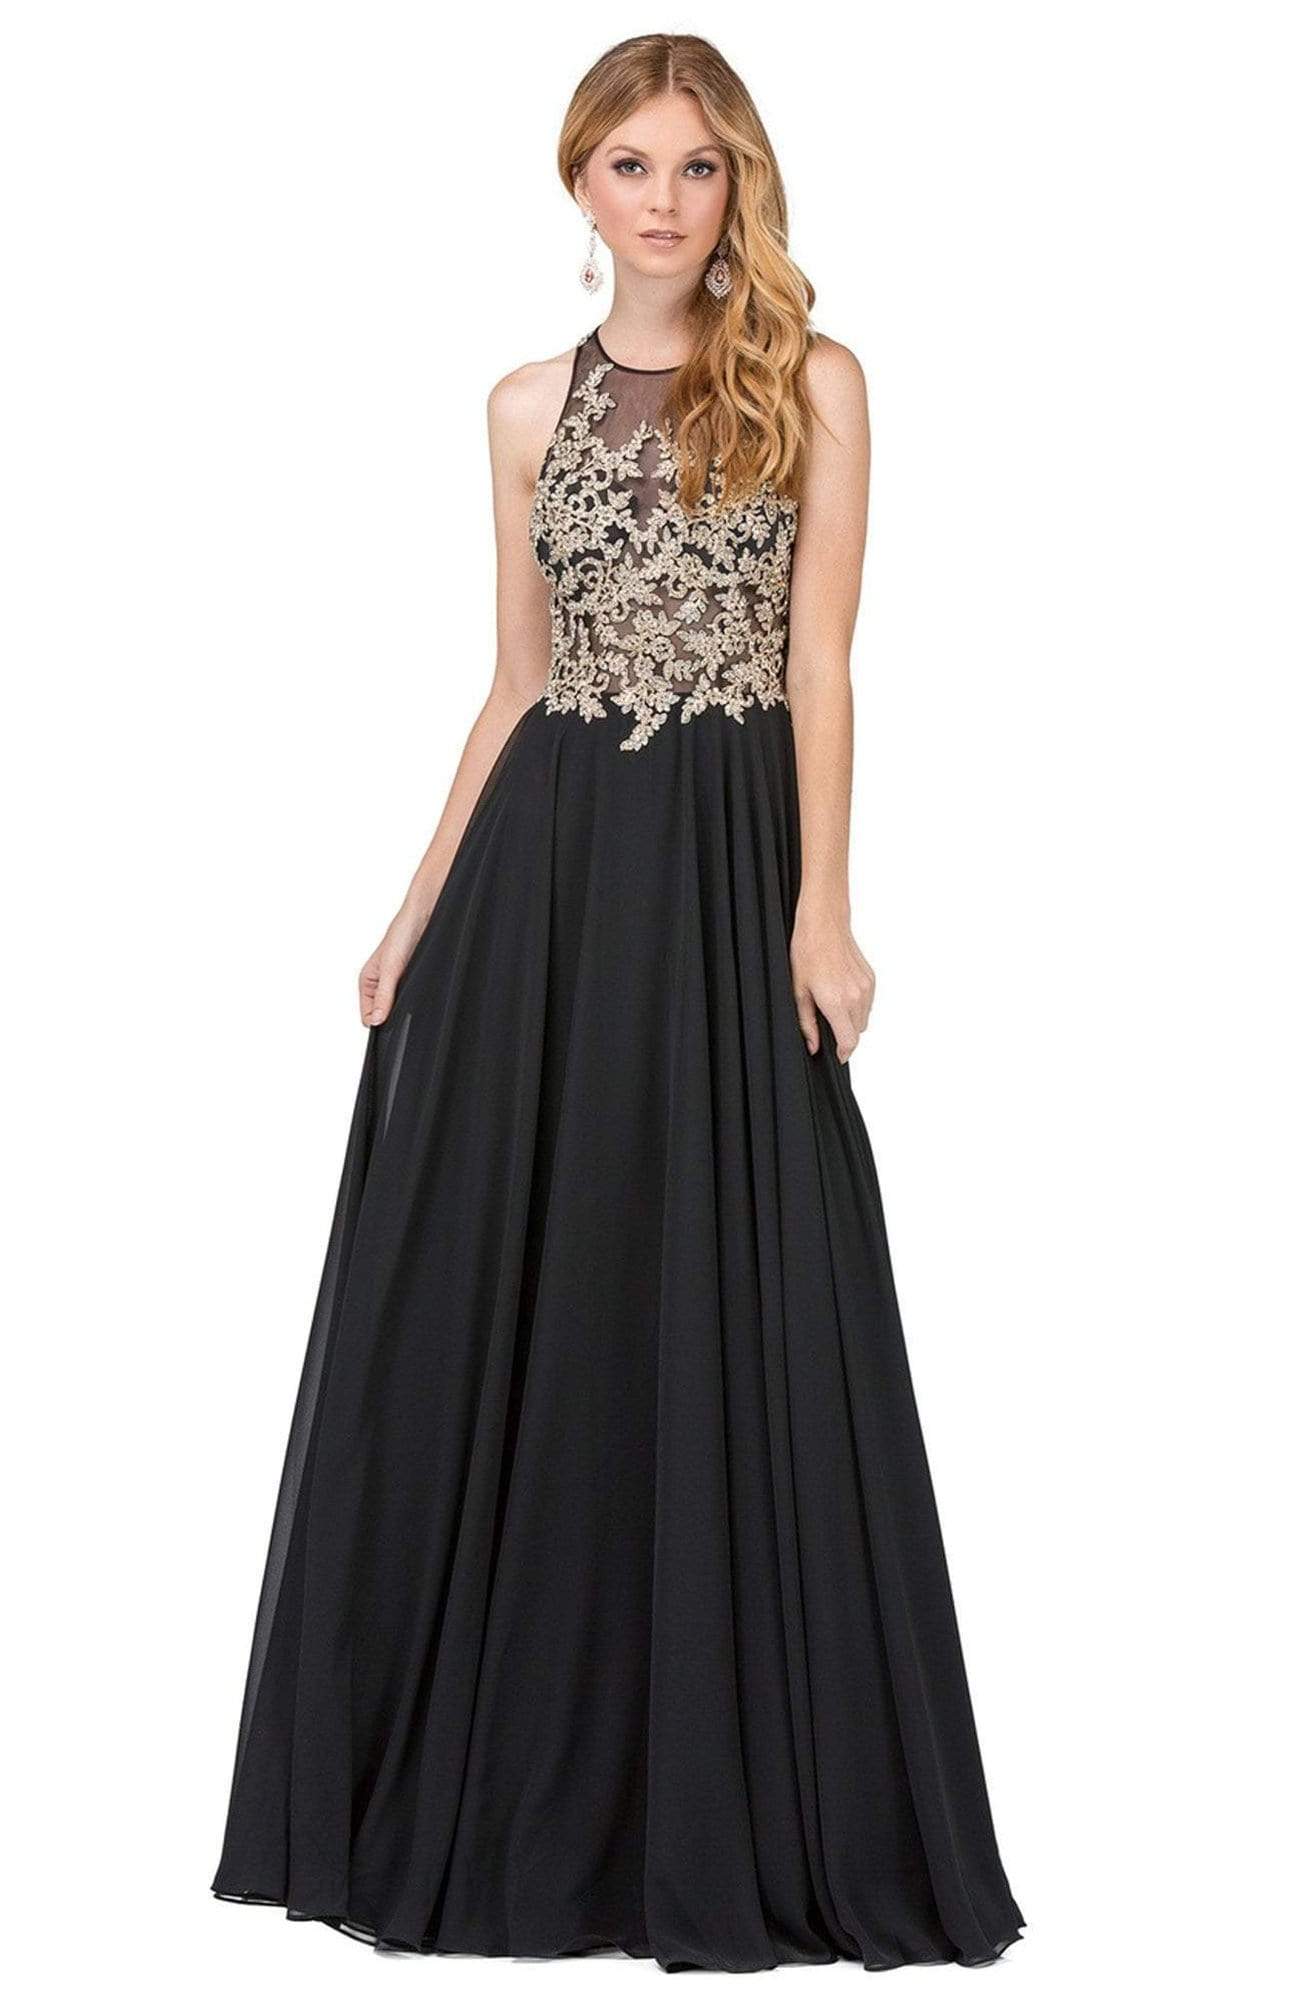 Dancing Queen - 2251 Lace Sheer Halter A-line Prom Dress Special Occasion Dress XS / Black